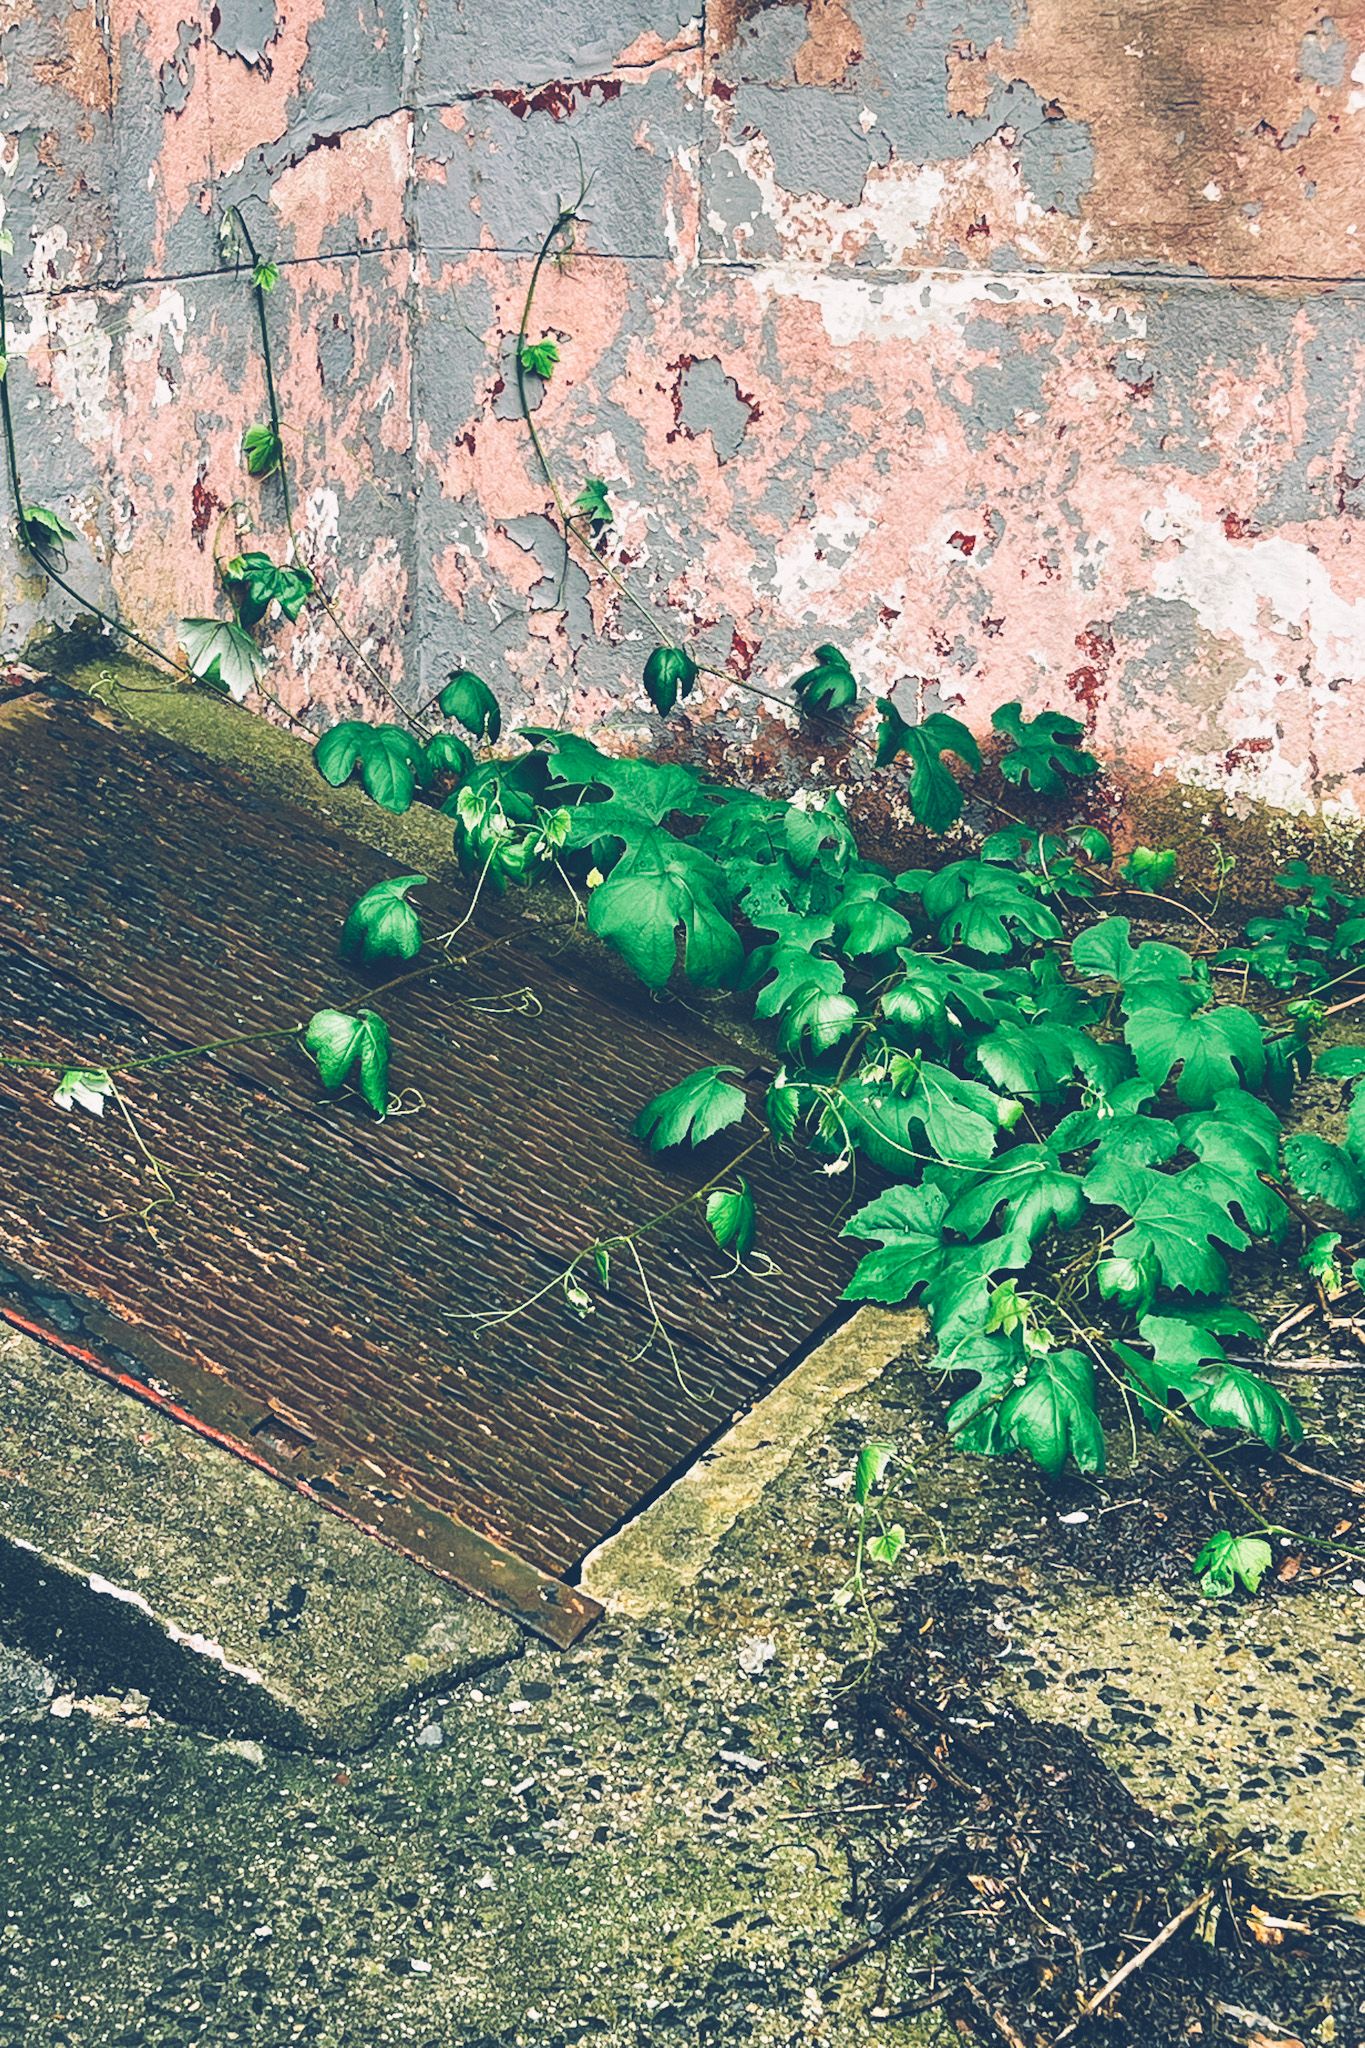 A dilapidated wall with pink and gray peeling paint stands behind a metal geate sticking up from the cement ground, green leaves of plants snaking around it.